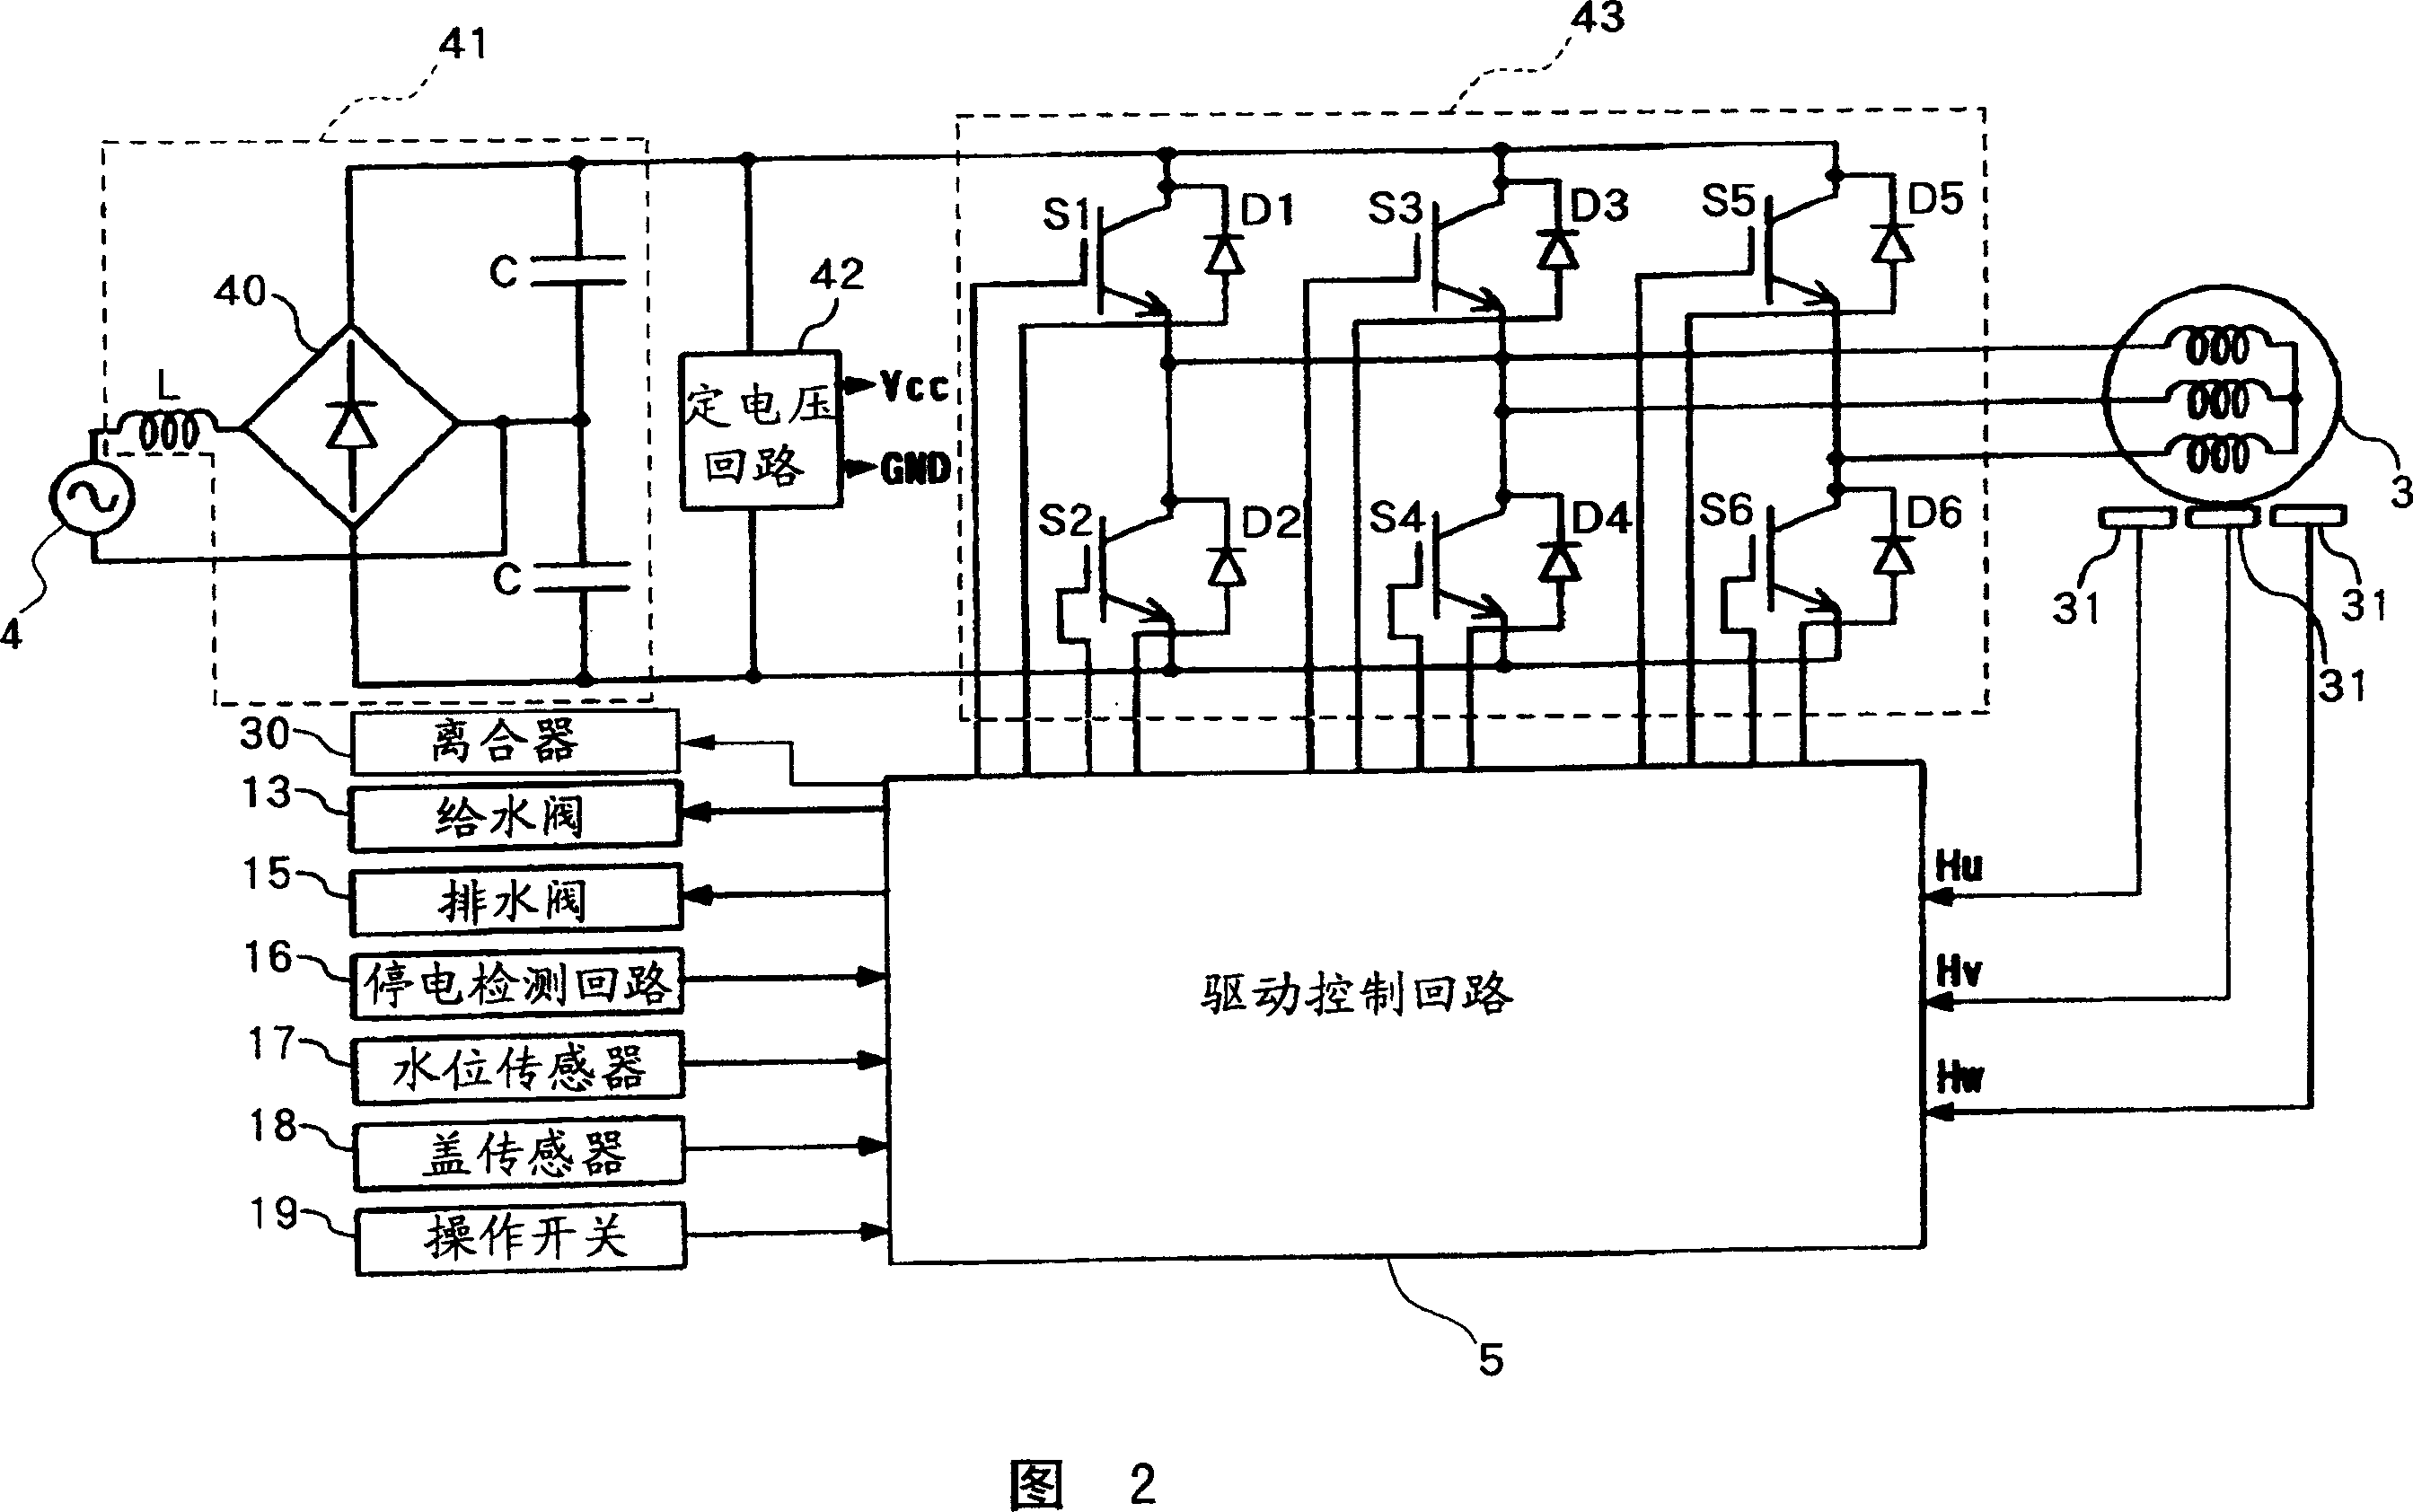 Control equipment of brushless motor and washing machine with the same equipment